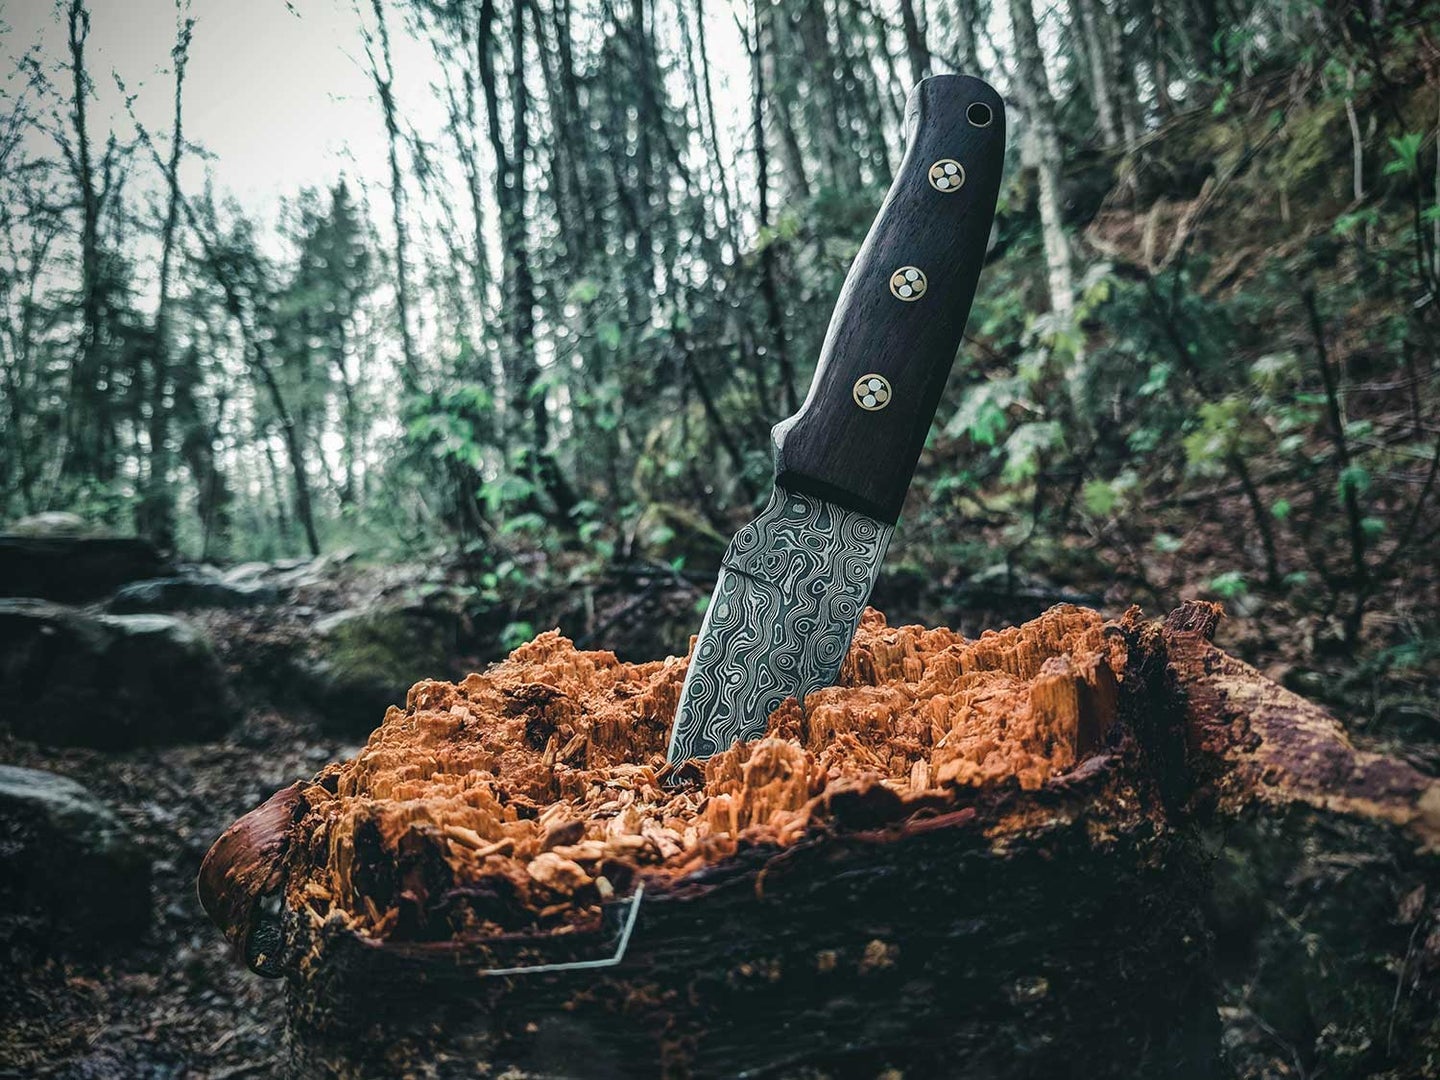 Sharpened knife in tree stump in woods.